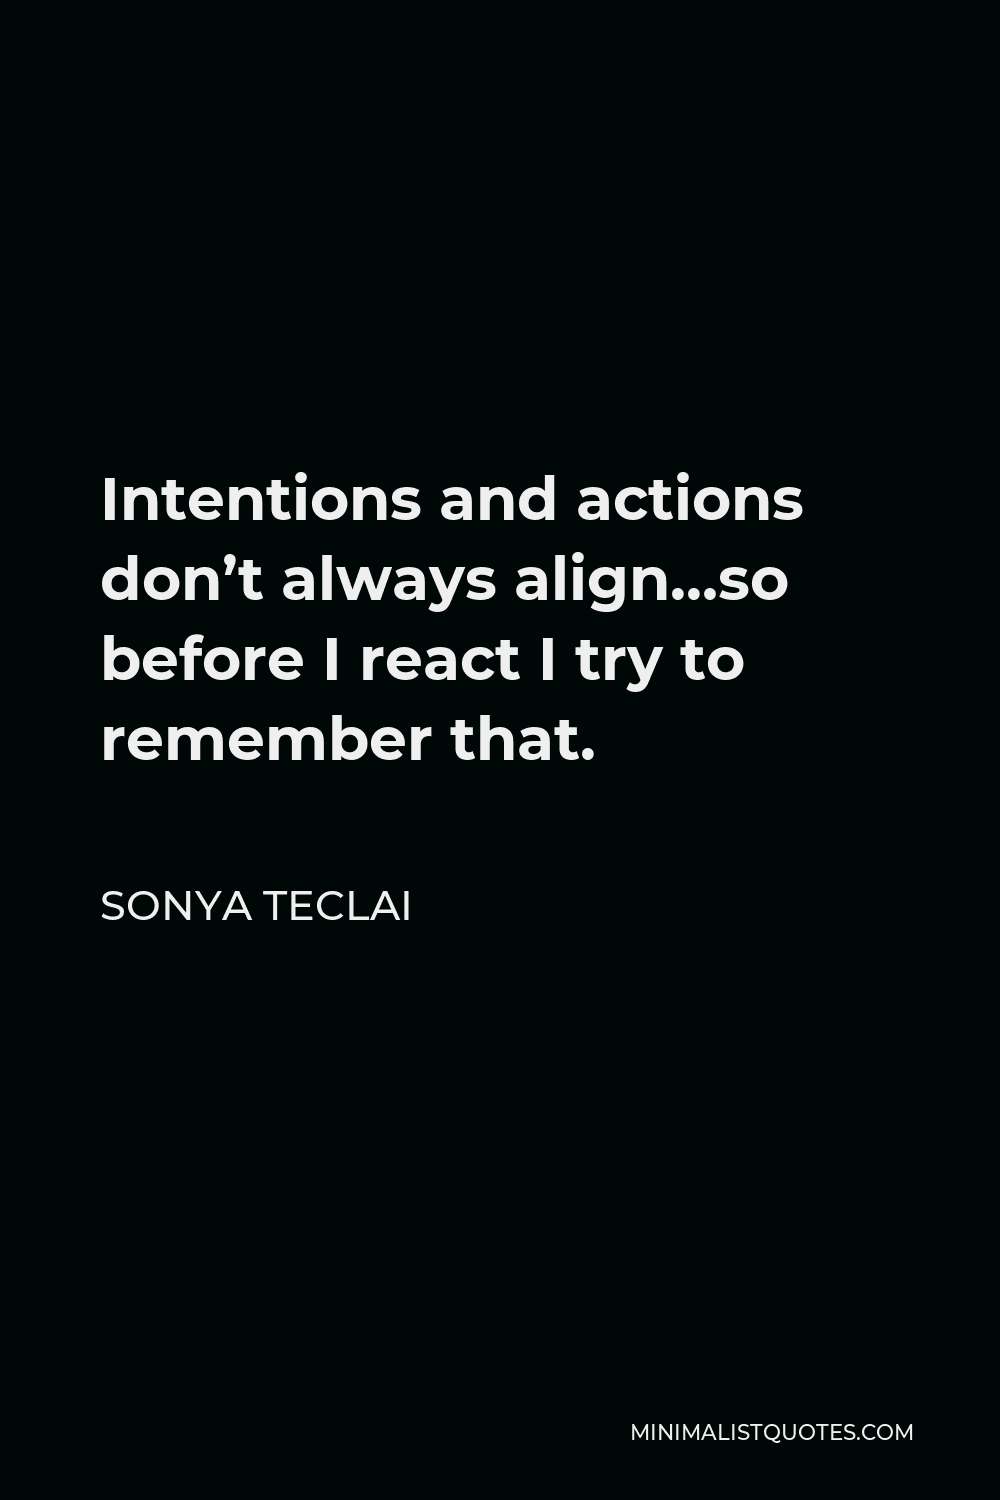 Sonya Teclai Quote - Intentions and actions don’t always align…so before I react I try to remember that.